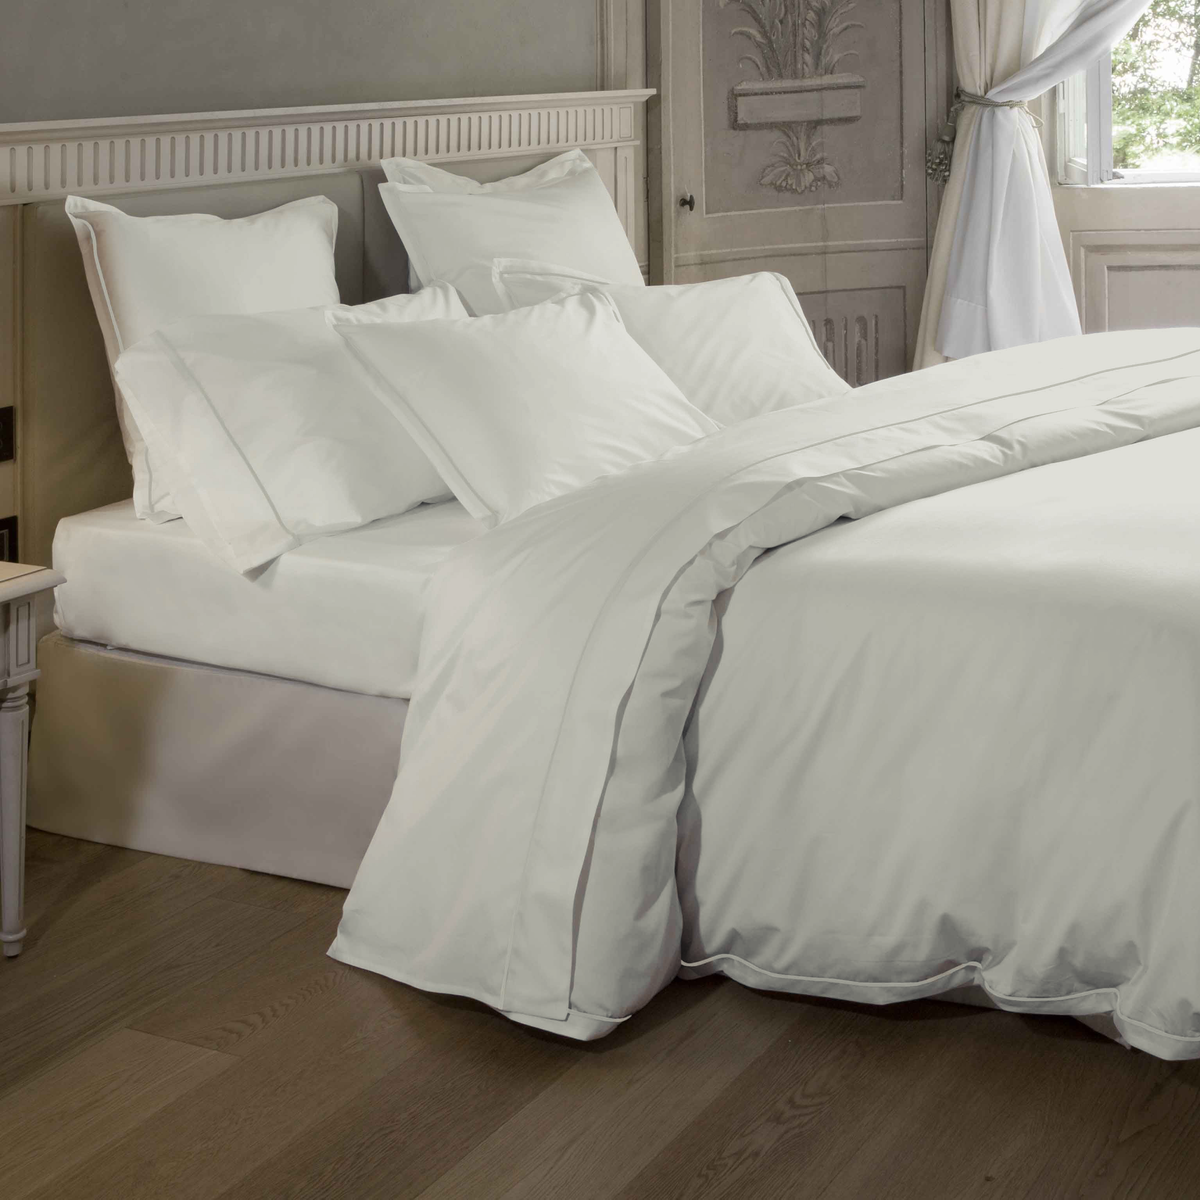 Full Bed Dressed in Signoria Luce Bedding in Ivory Color